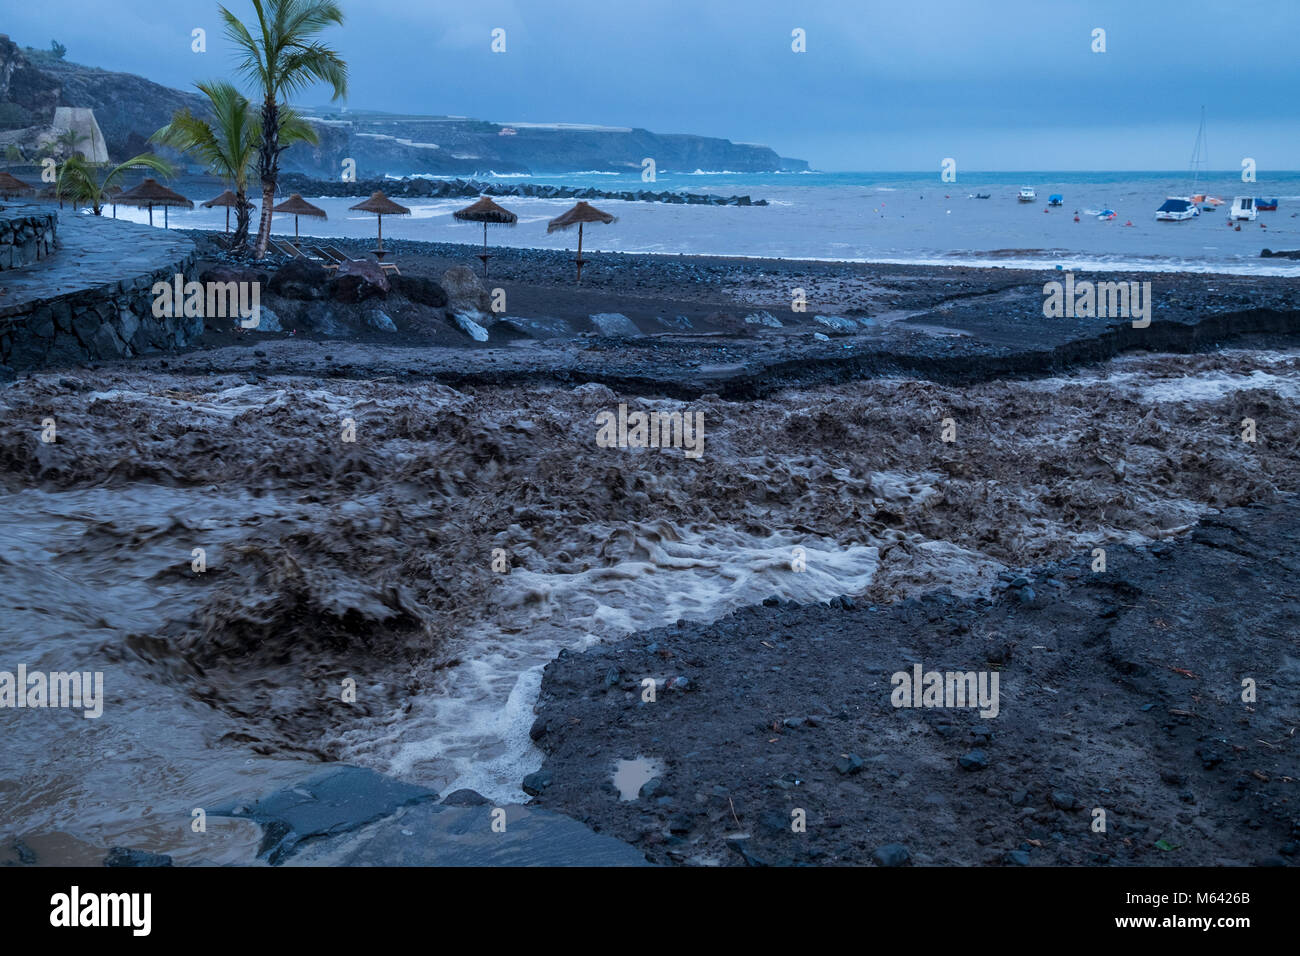 Playa San Juan, Tenerife, 28 February 2018. Floodwaters from heavy rains overnight wash away the beach as the water flows down from the mountains.A regular occurrence during the winter months. Canary Islands Spain Stock Photo